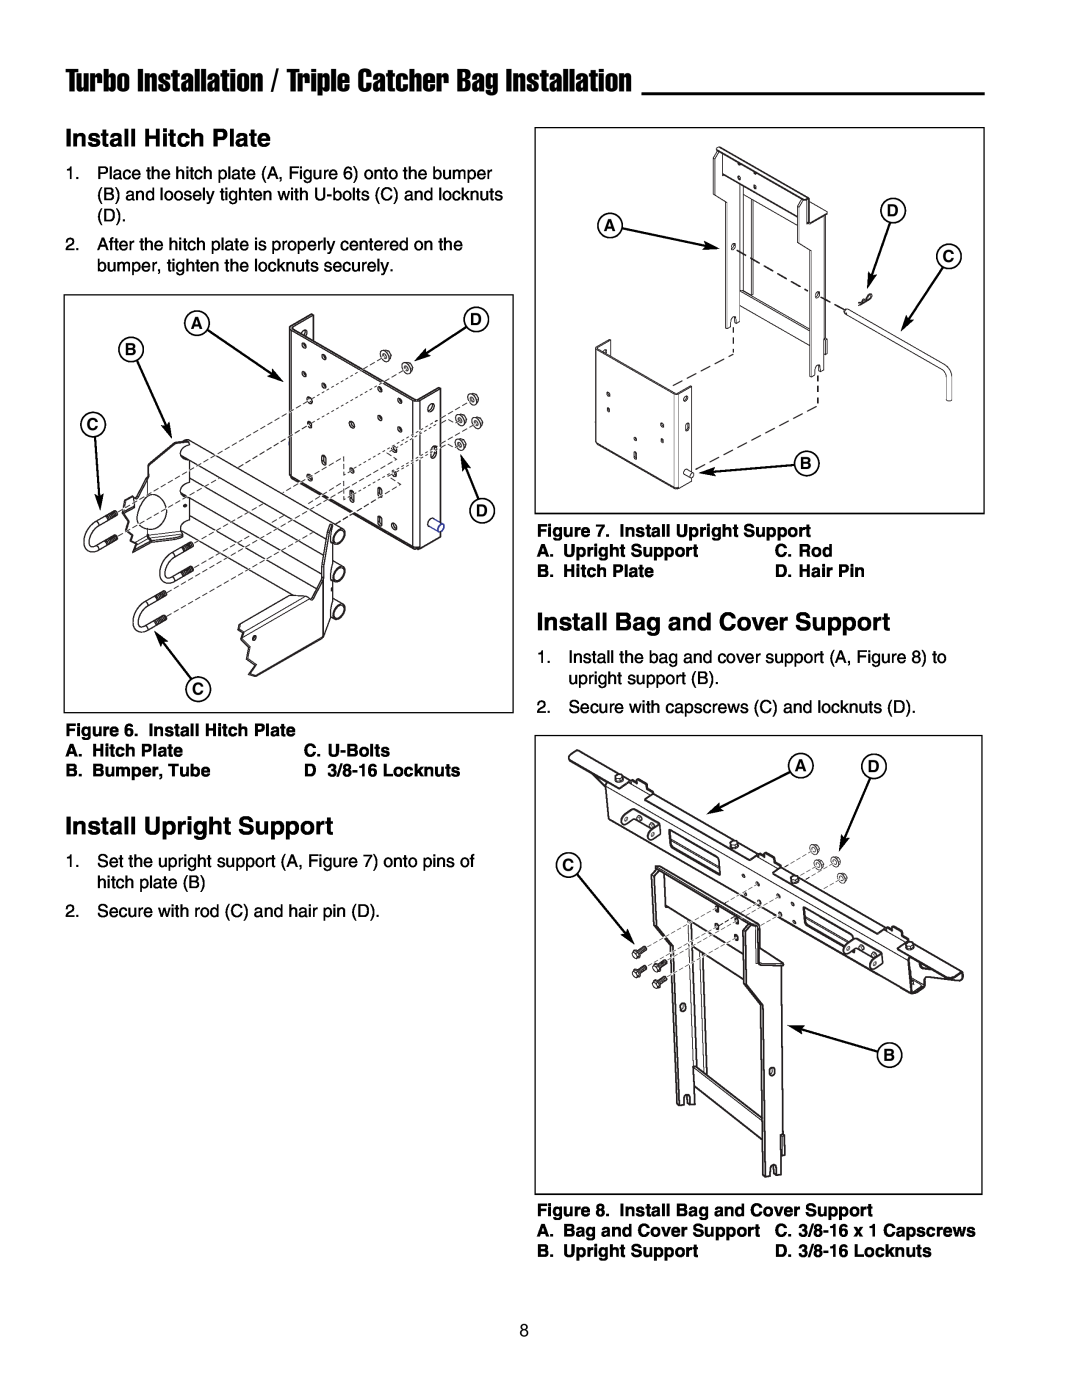 Snapper 1695464 manual Install Hitch Plate, Install Upright Support, Install Bag and Cover Support 